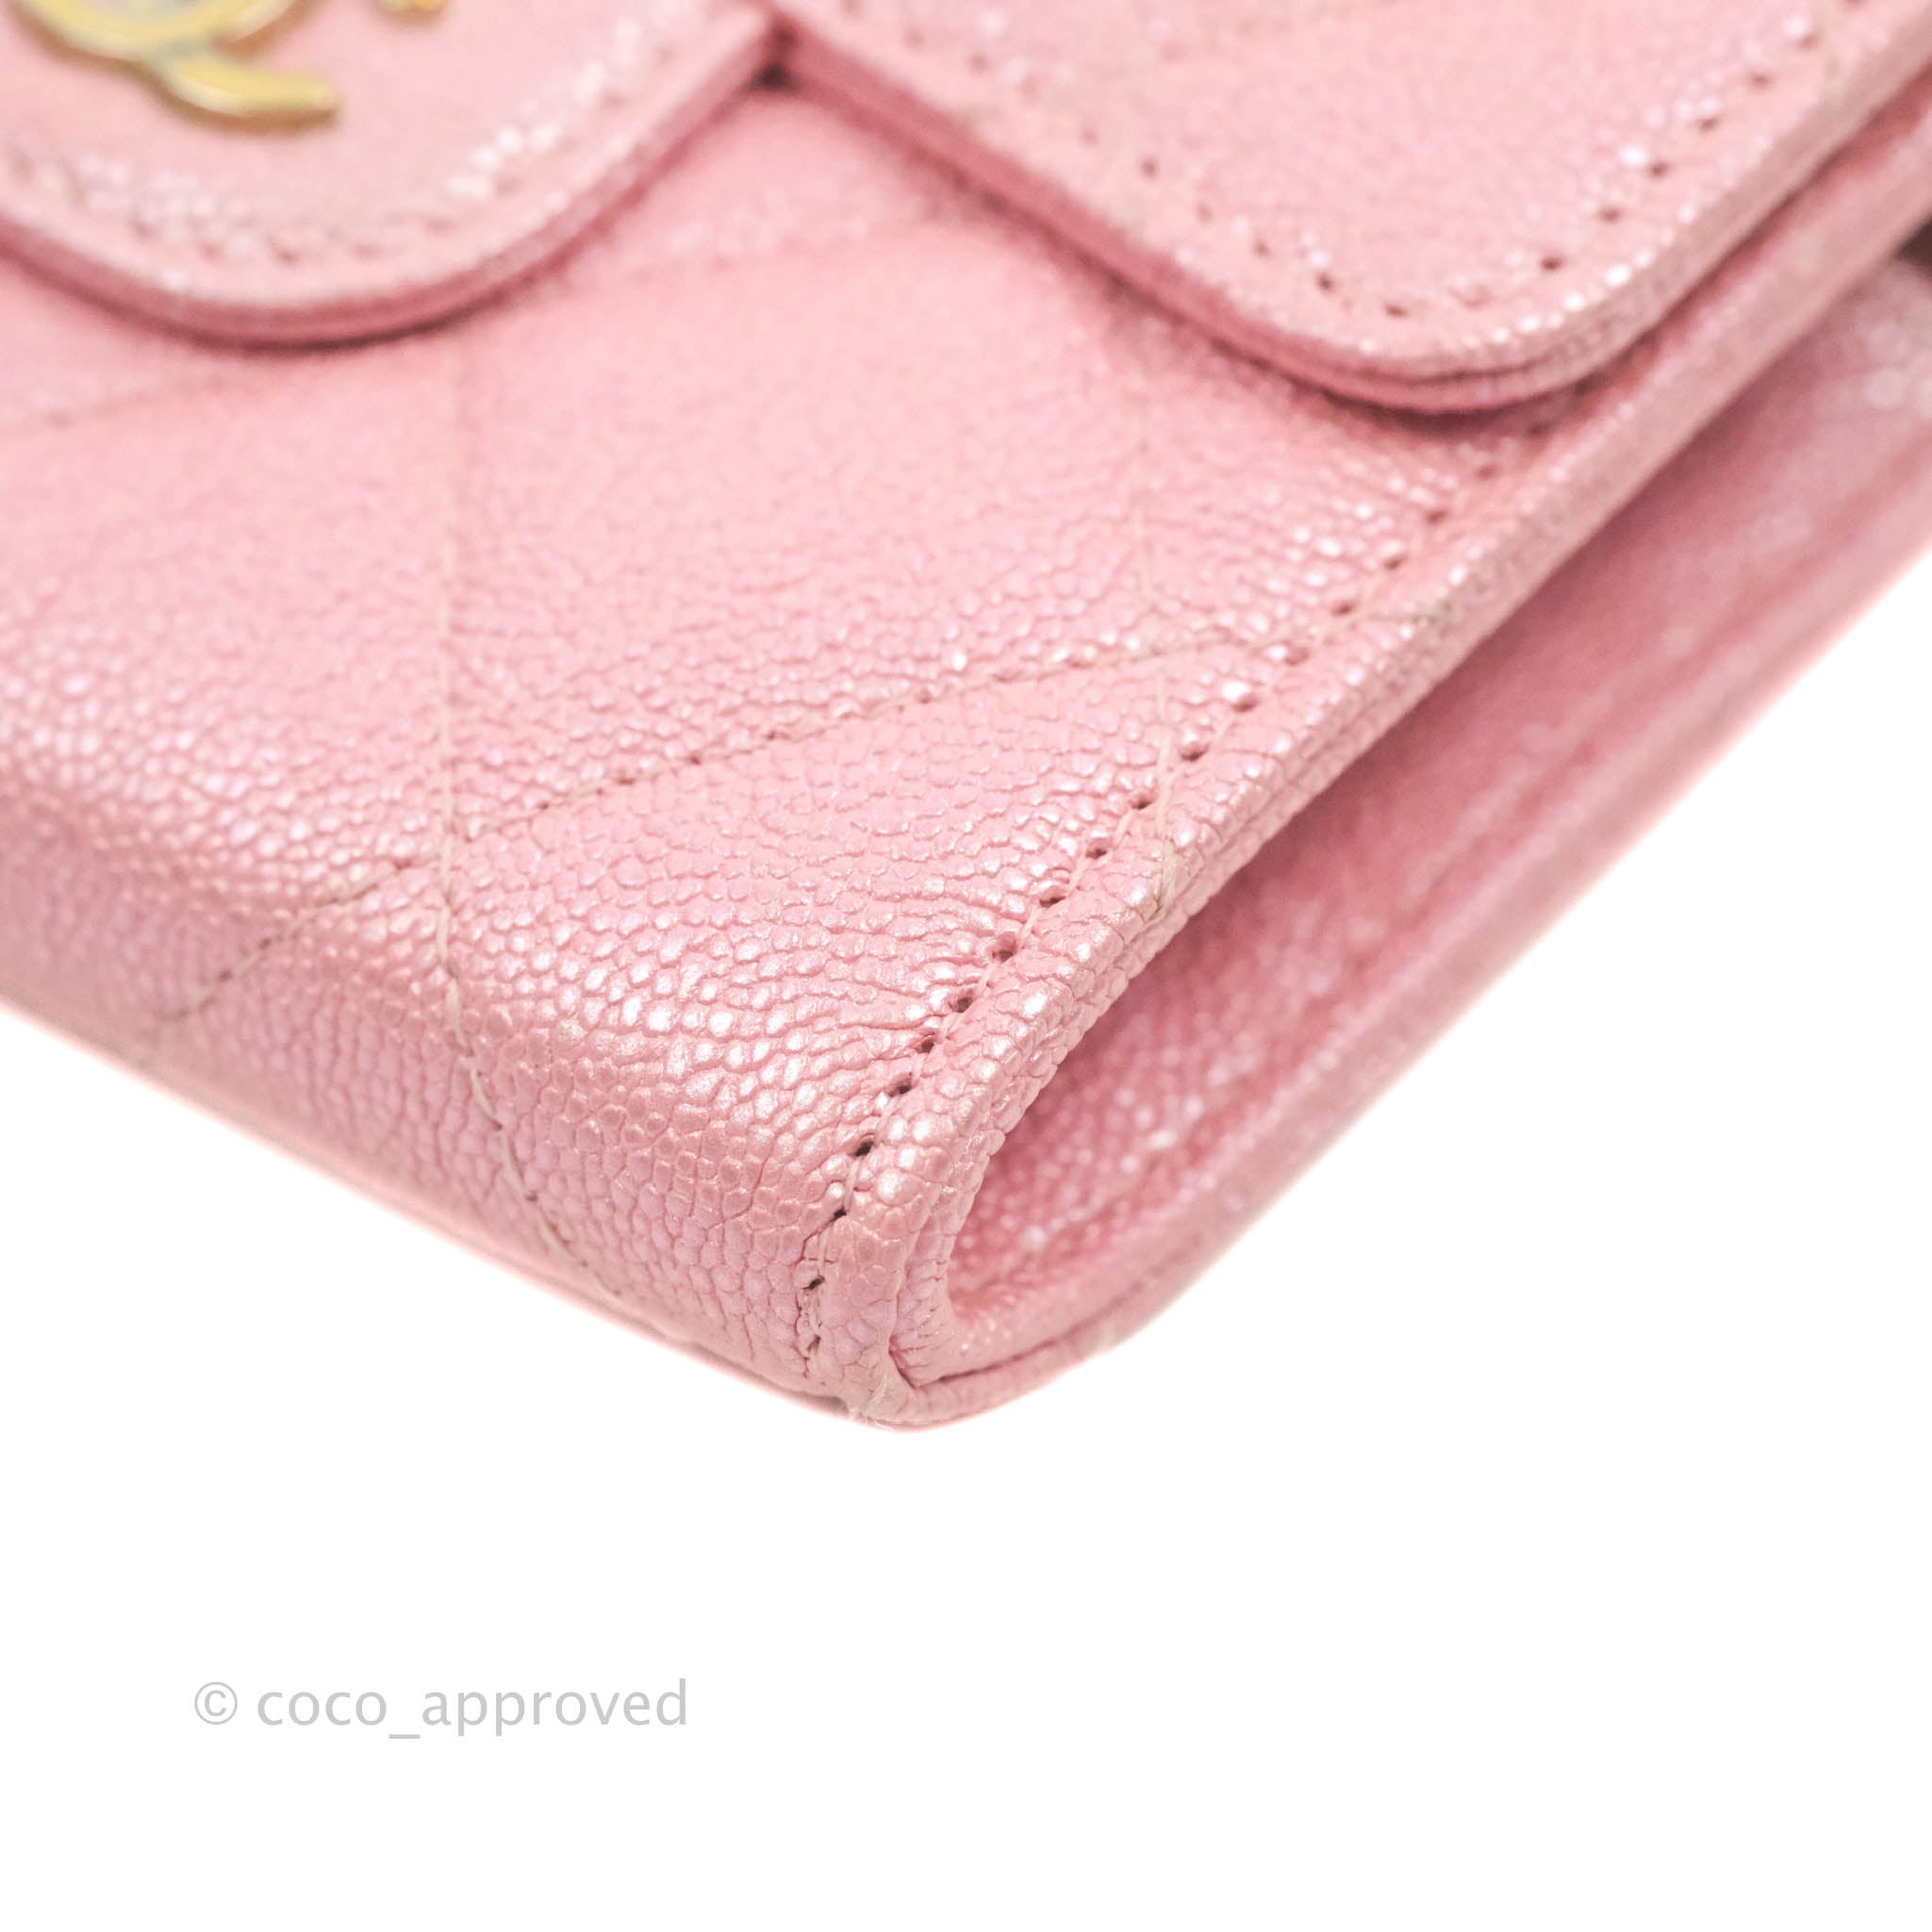 Chanel 2021 2021 Chanel 19 Card Holder Card Holder - Pink Wallets,  Accessories - CHA582325